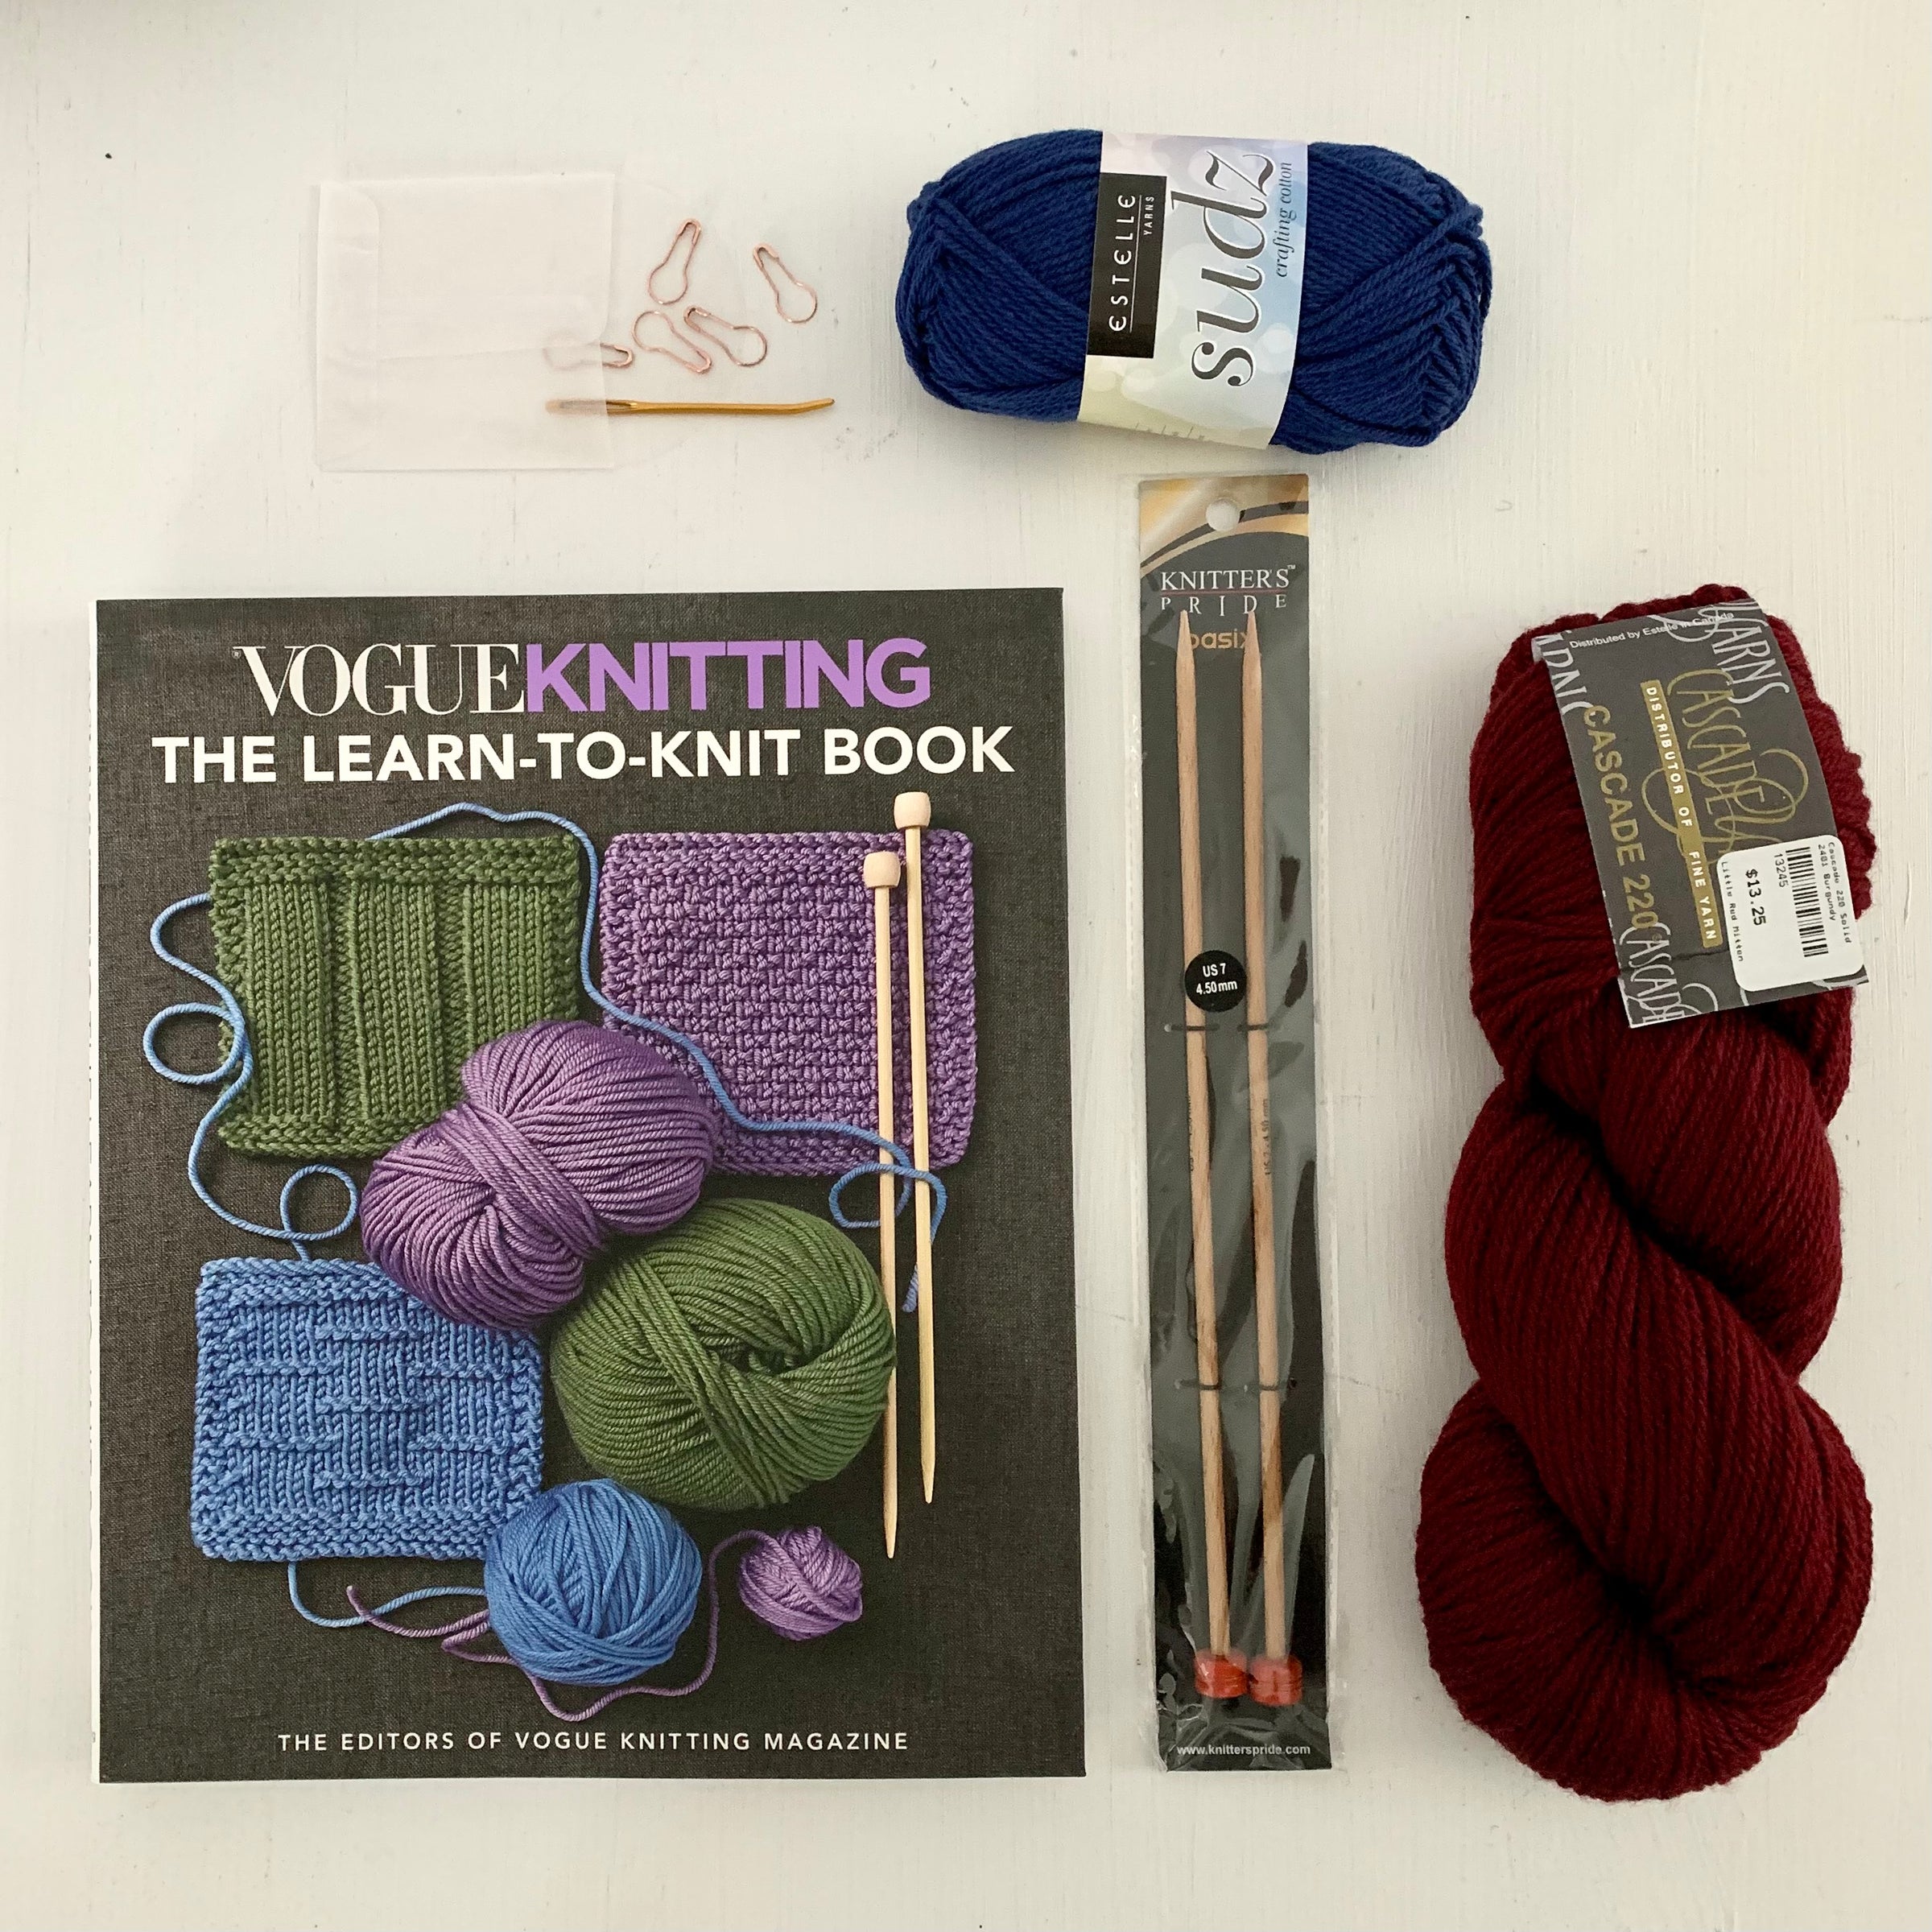 Knit Kit: Learn To Knit - Beginner Level (Headband or Cowl Option